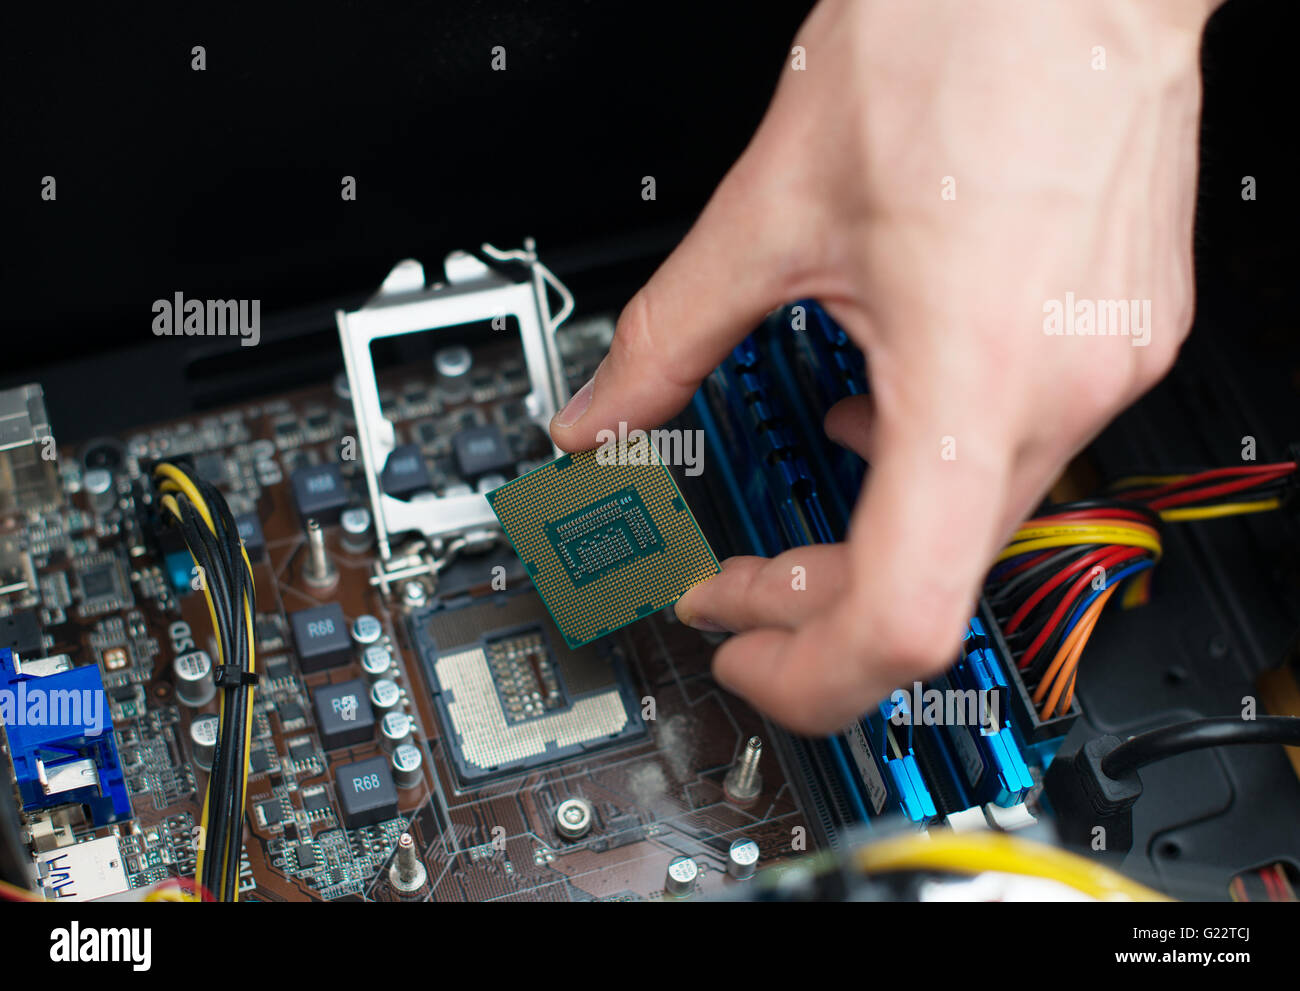 Computer technician installing CPU into motherboard. Stock Photo